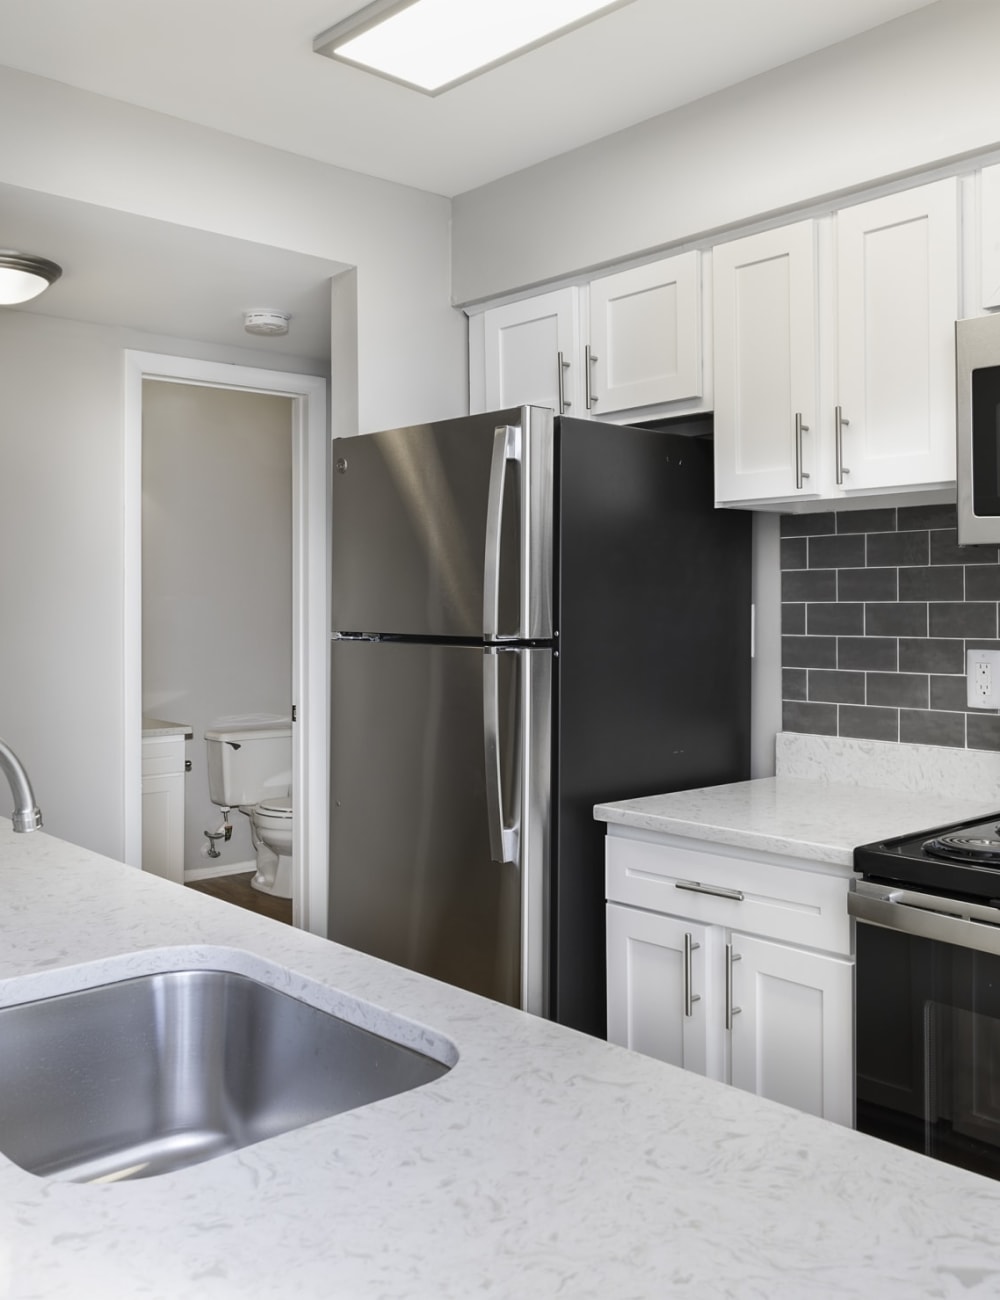 Stainless steel appliances in an apartment kitchen at Springwoods at Lake Ridge in Woodbridge, Virginia